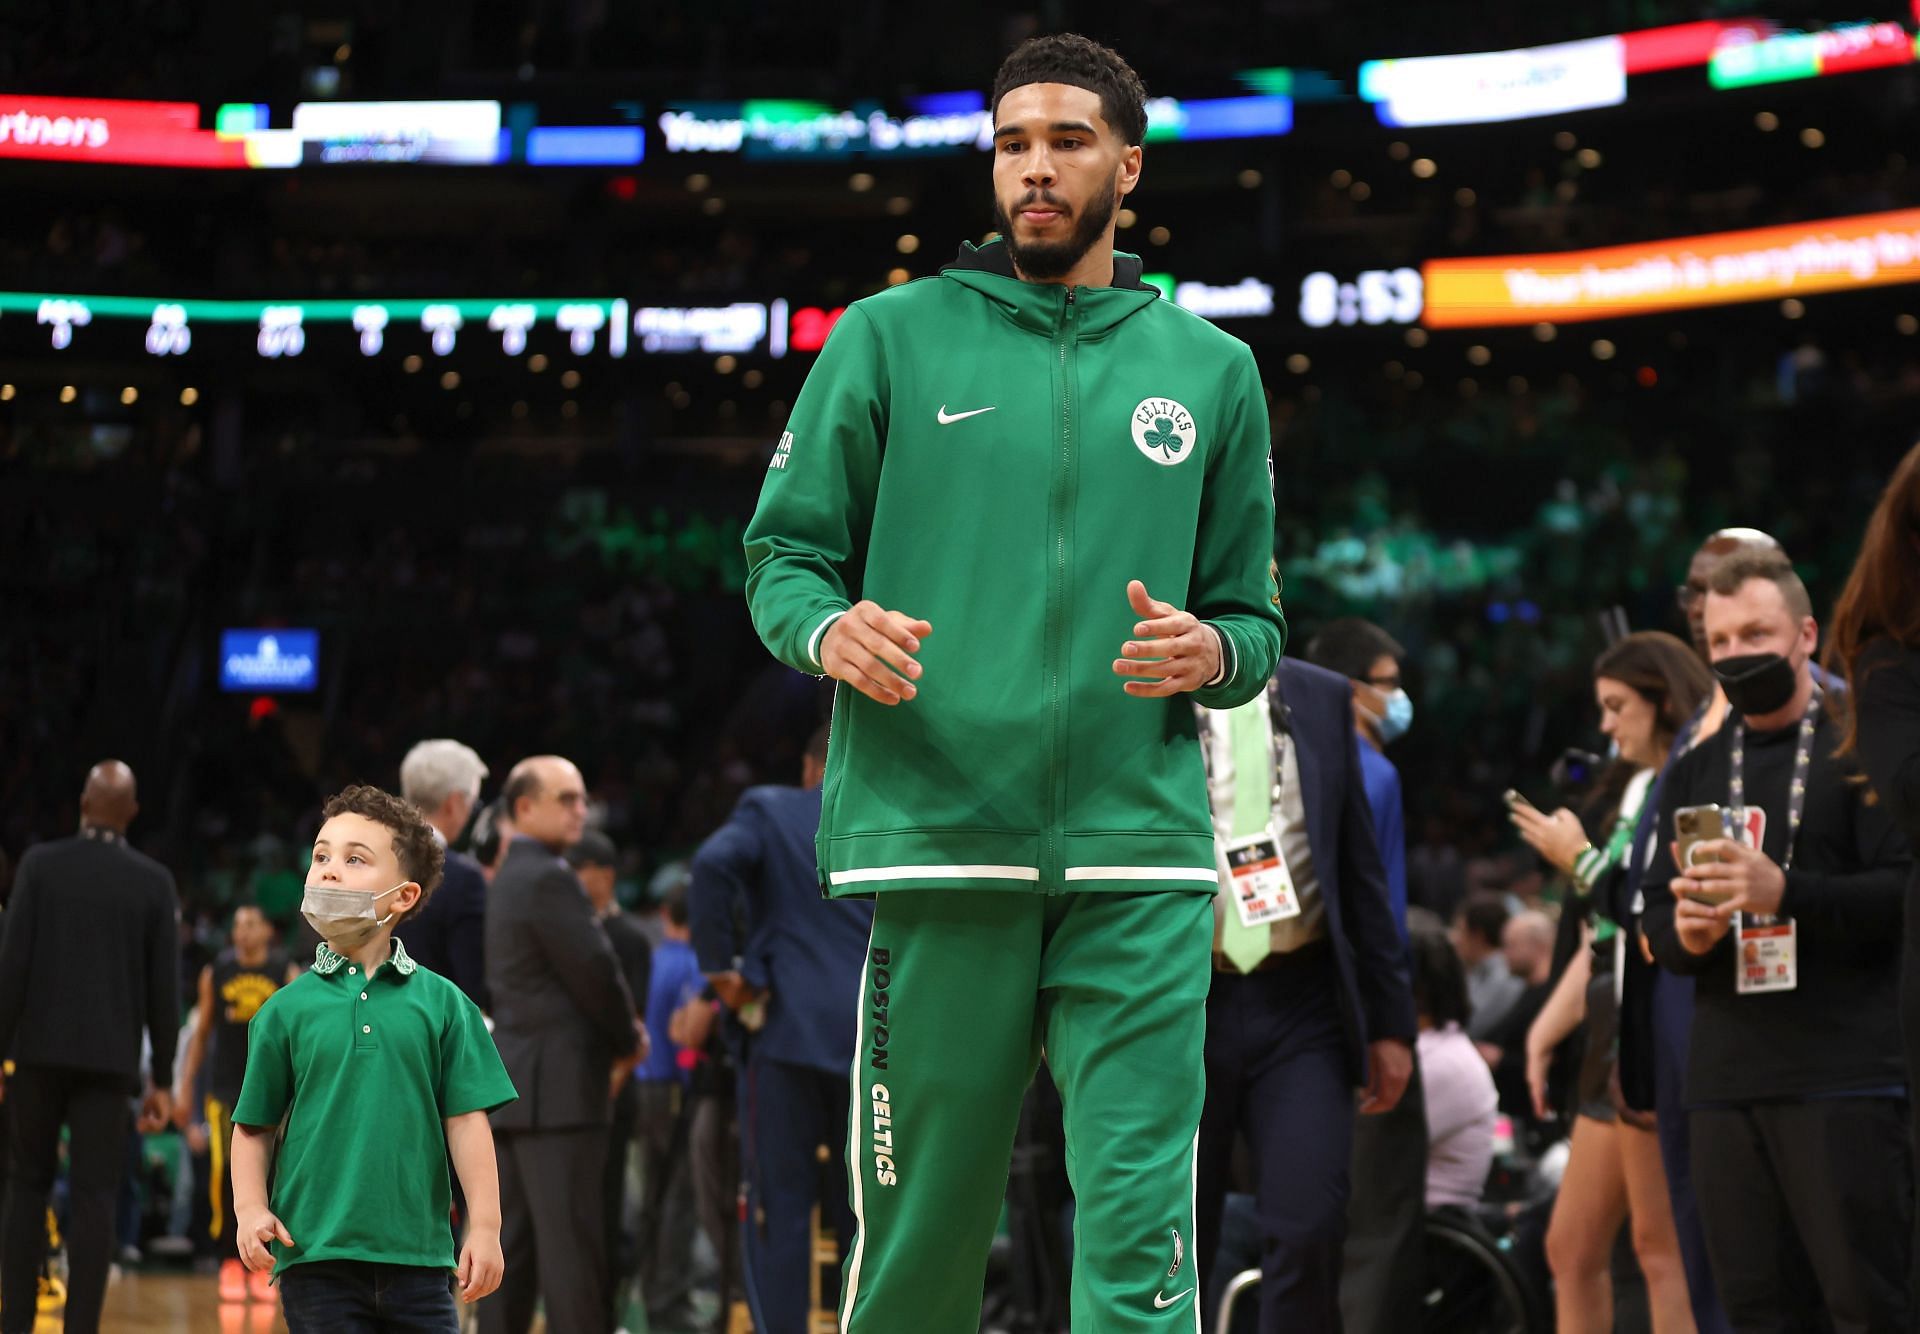 Who is Jayson Tatum's baby's mother? Looking at their relationship history  and parentage of son Deuce Tatum